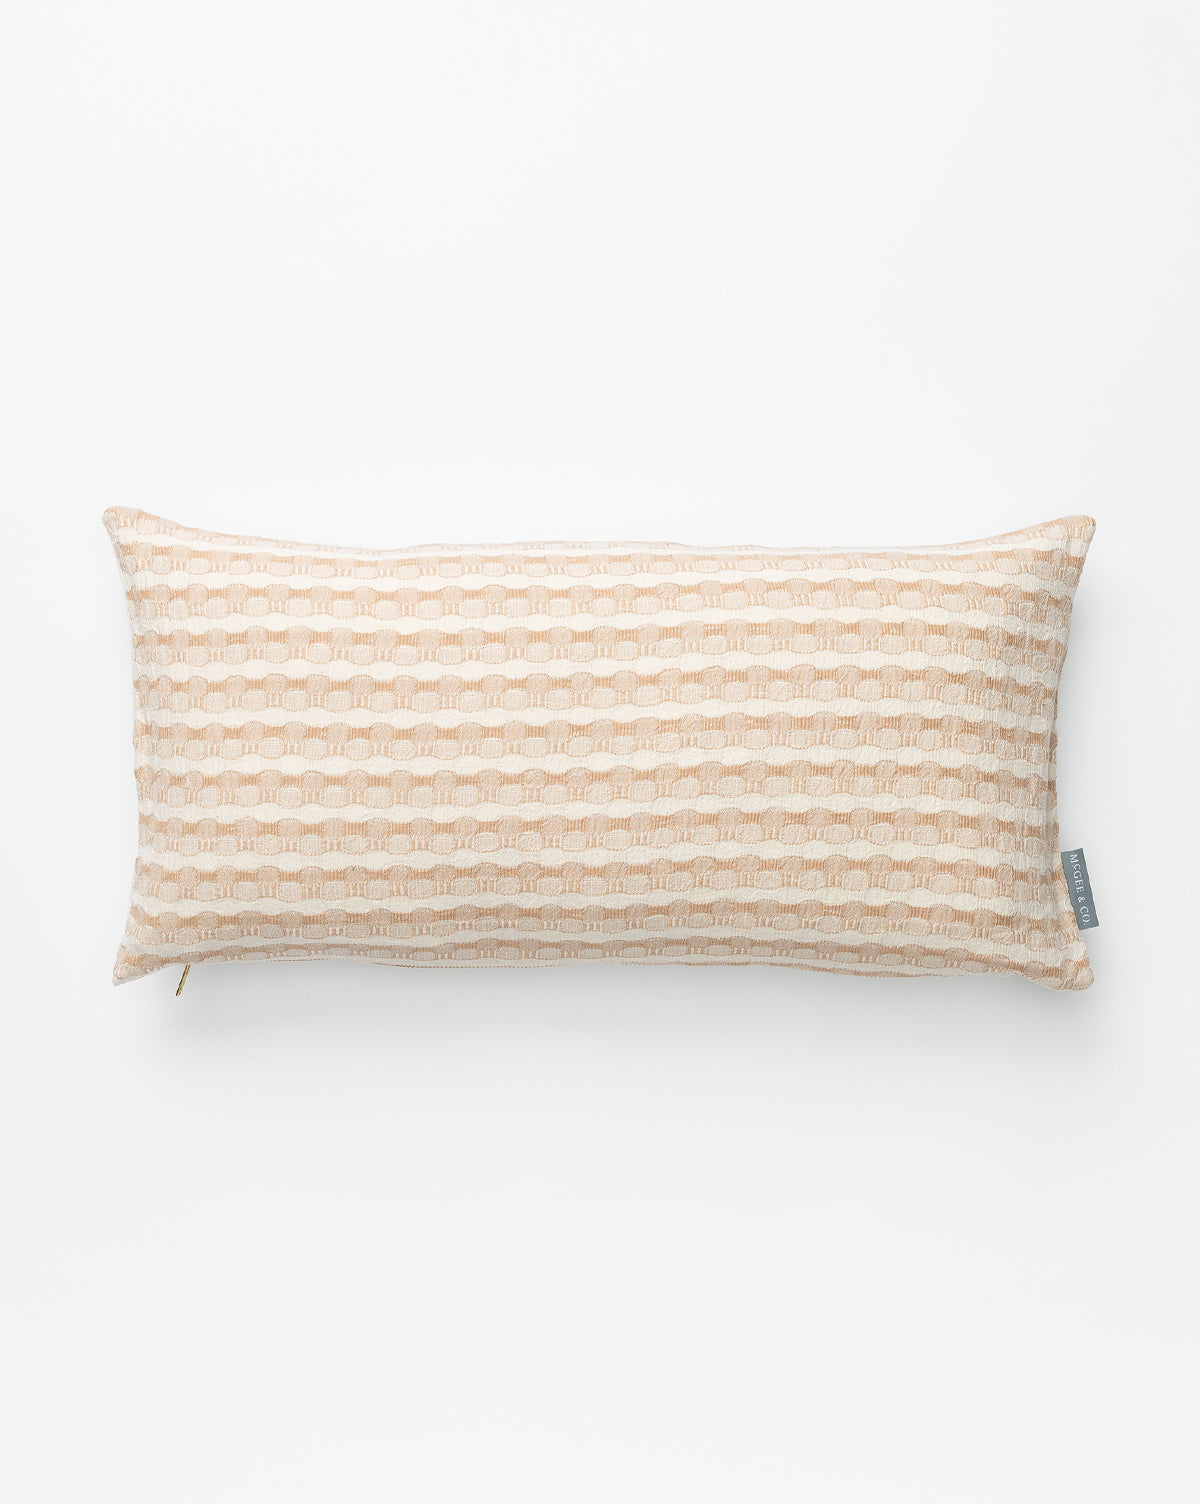 Tangren, Vintage Natural Patterned Pillow Cover No. 2